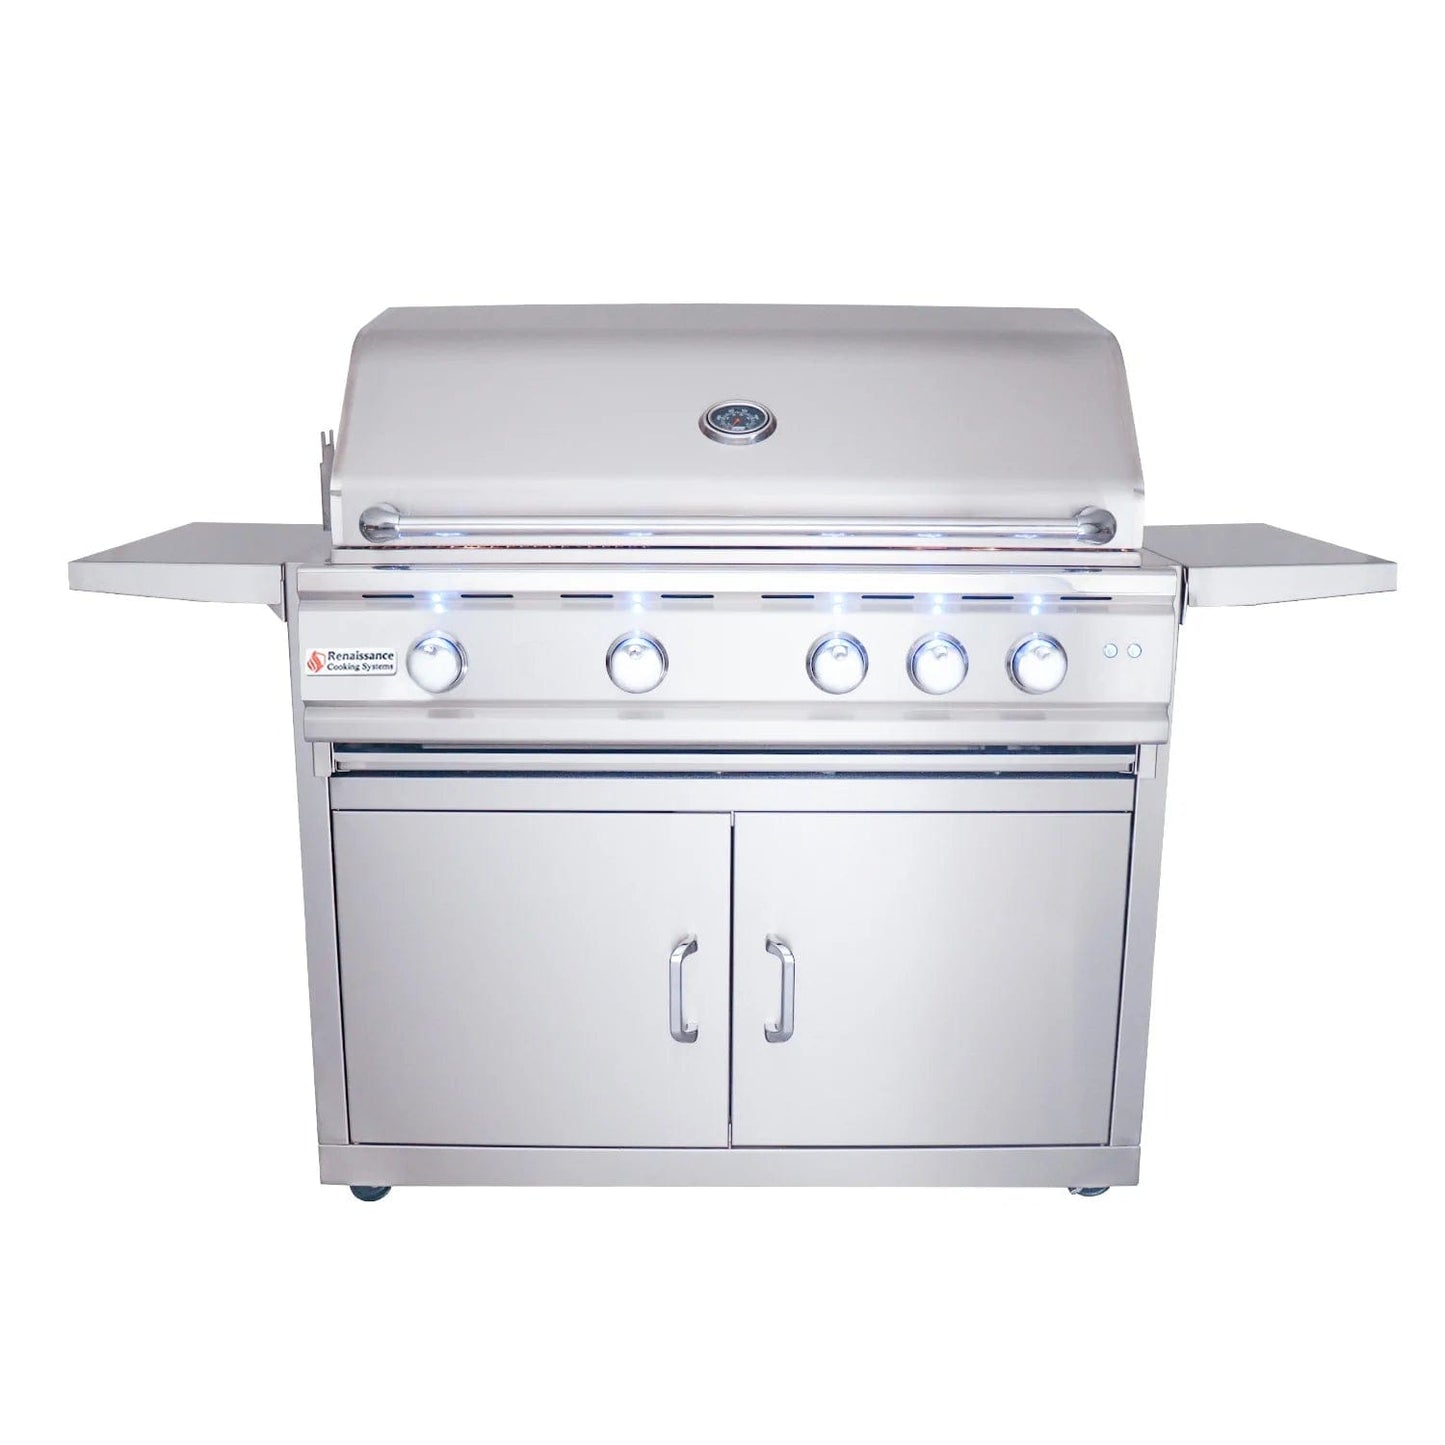 The Renaissance Cooking Systems - 38" Cutlass Pro Series Portable Grill - Kitchen King Direct